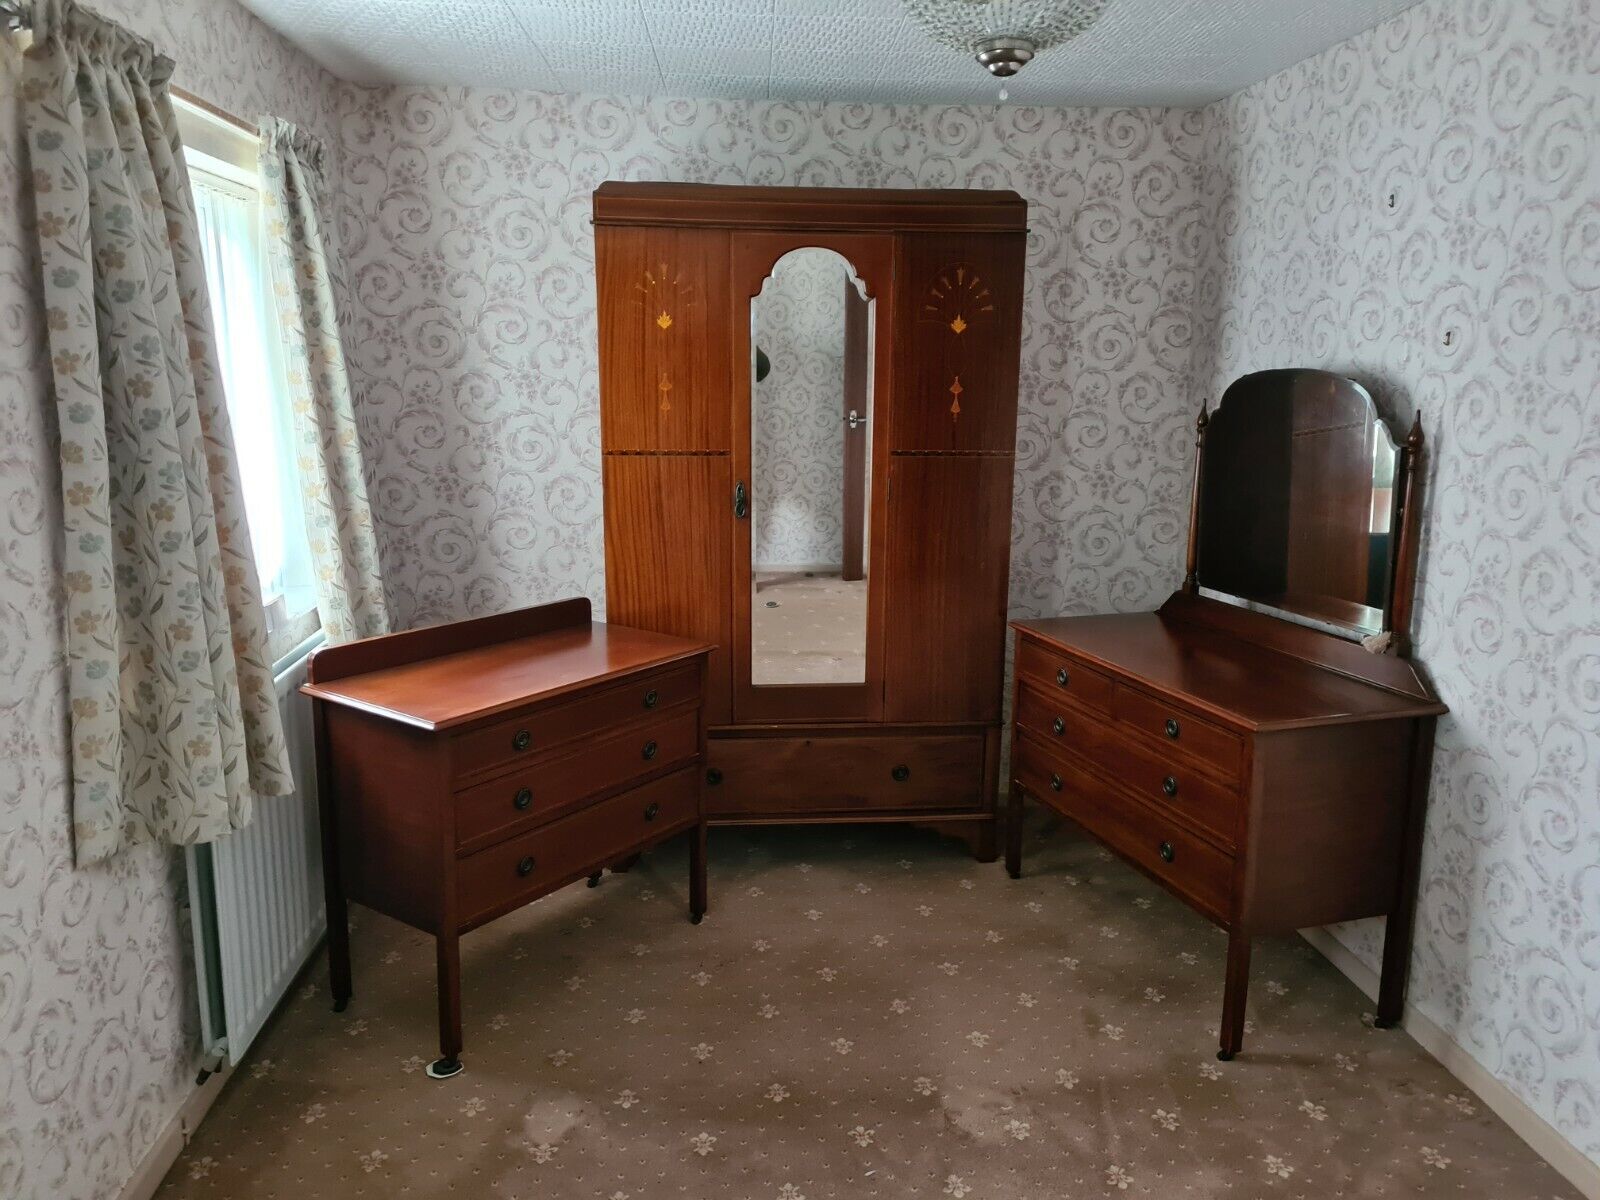 Buy Wardrobe Dressing Table Draws, Bed Room Suite Possible Local Delivery SR83PL